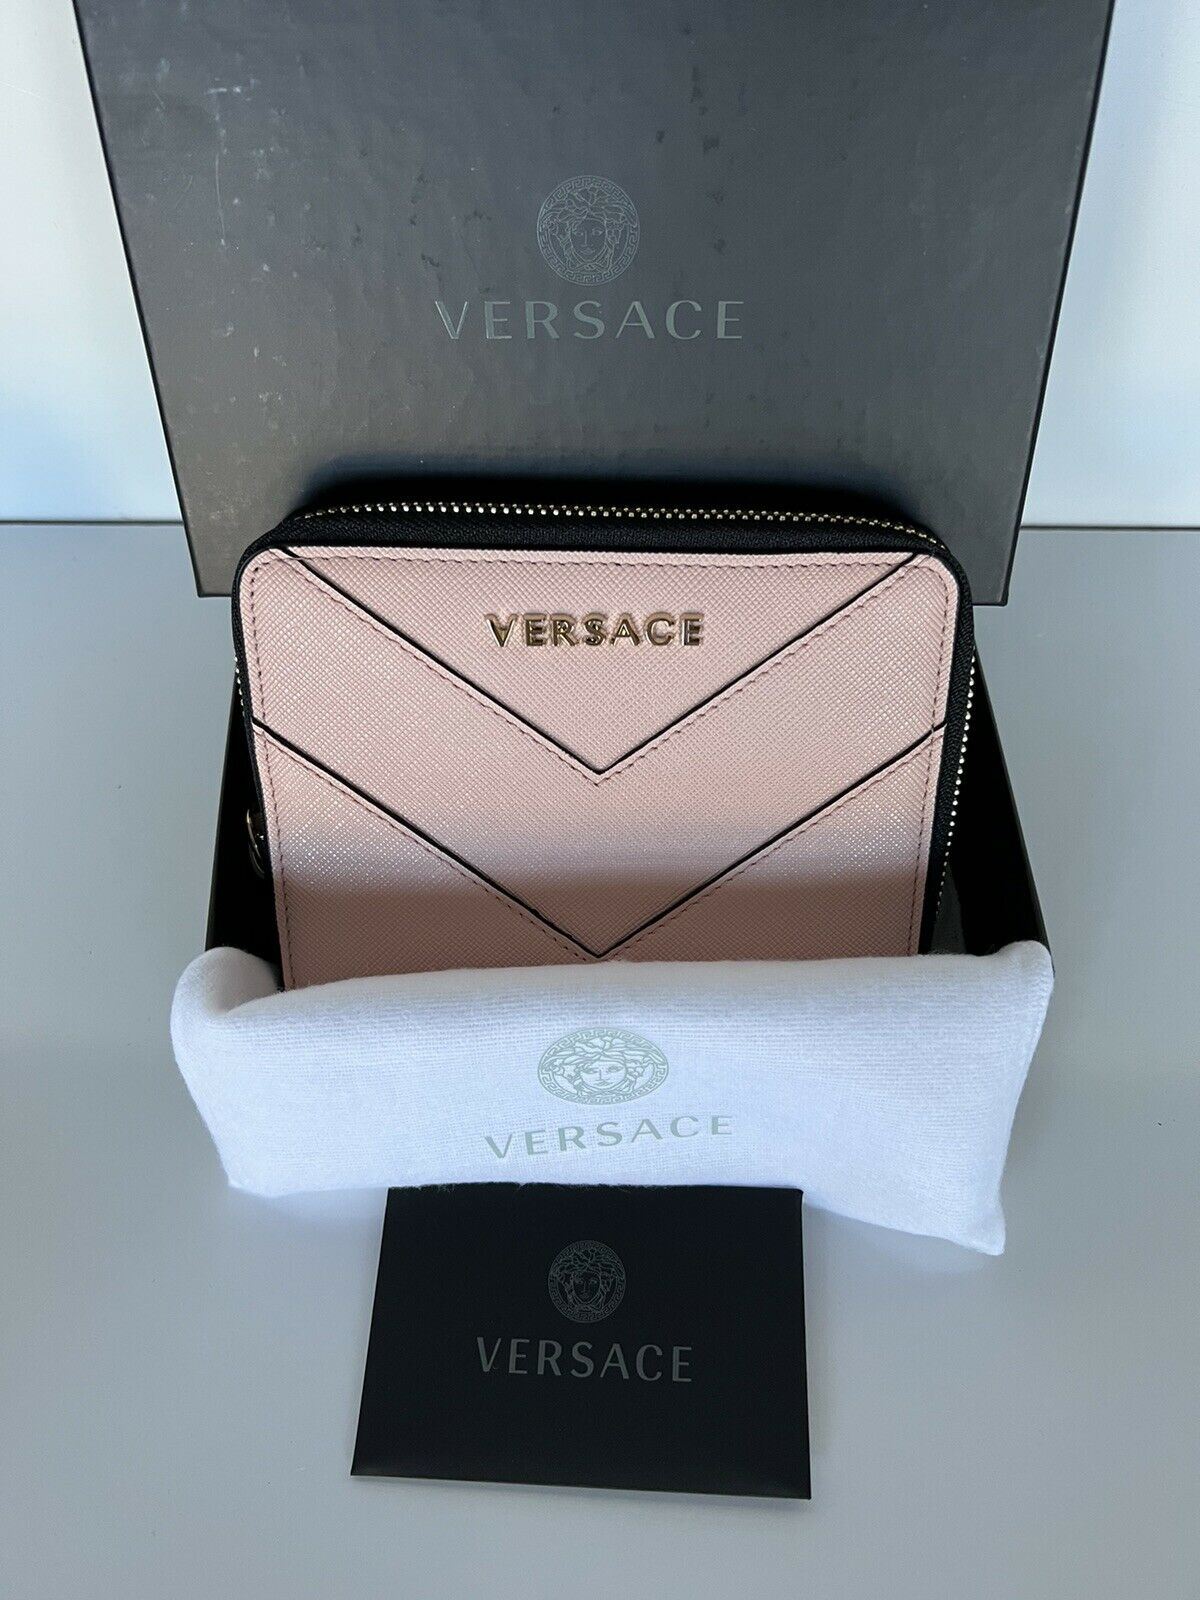 NWT Versace Blush Pink Calf Leather Medium Zipper Wallet Made in Italy 593